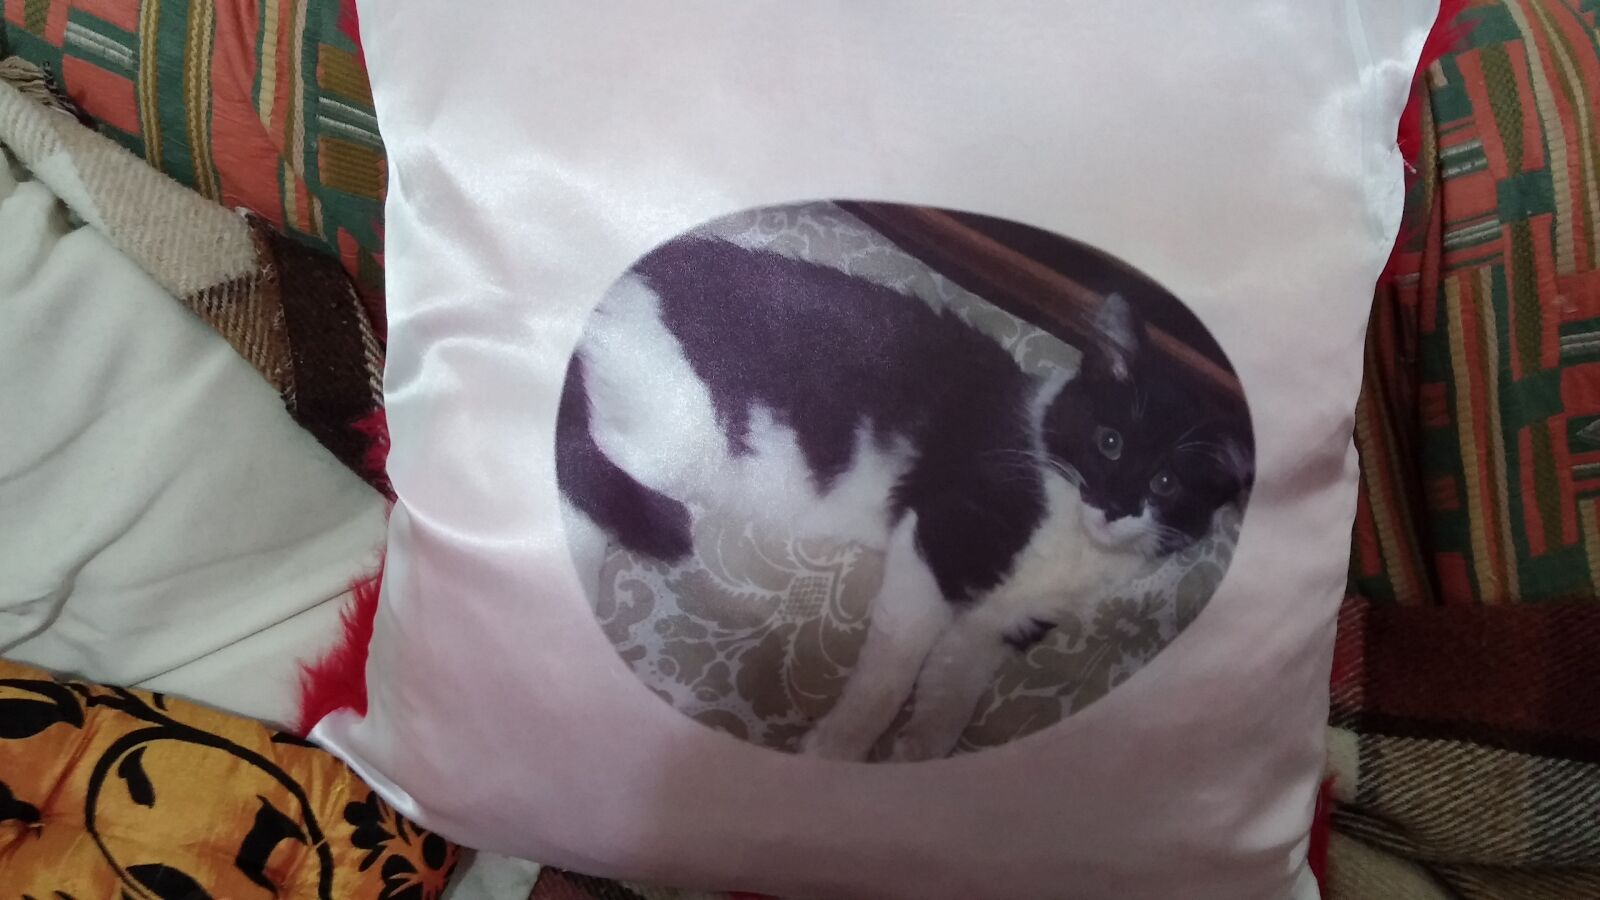 LG G2 sample photo. Pillow, sophie on pillow photography